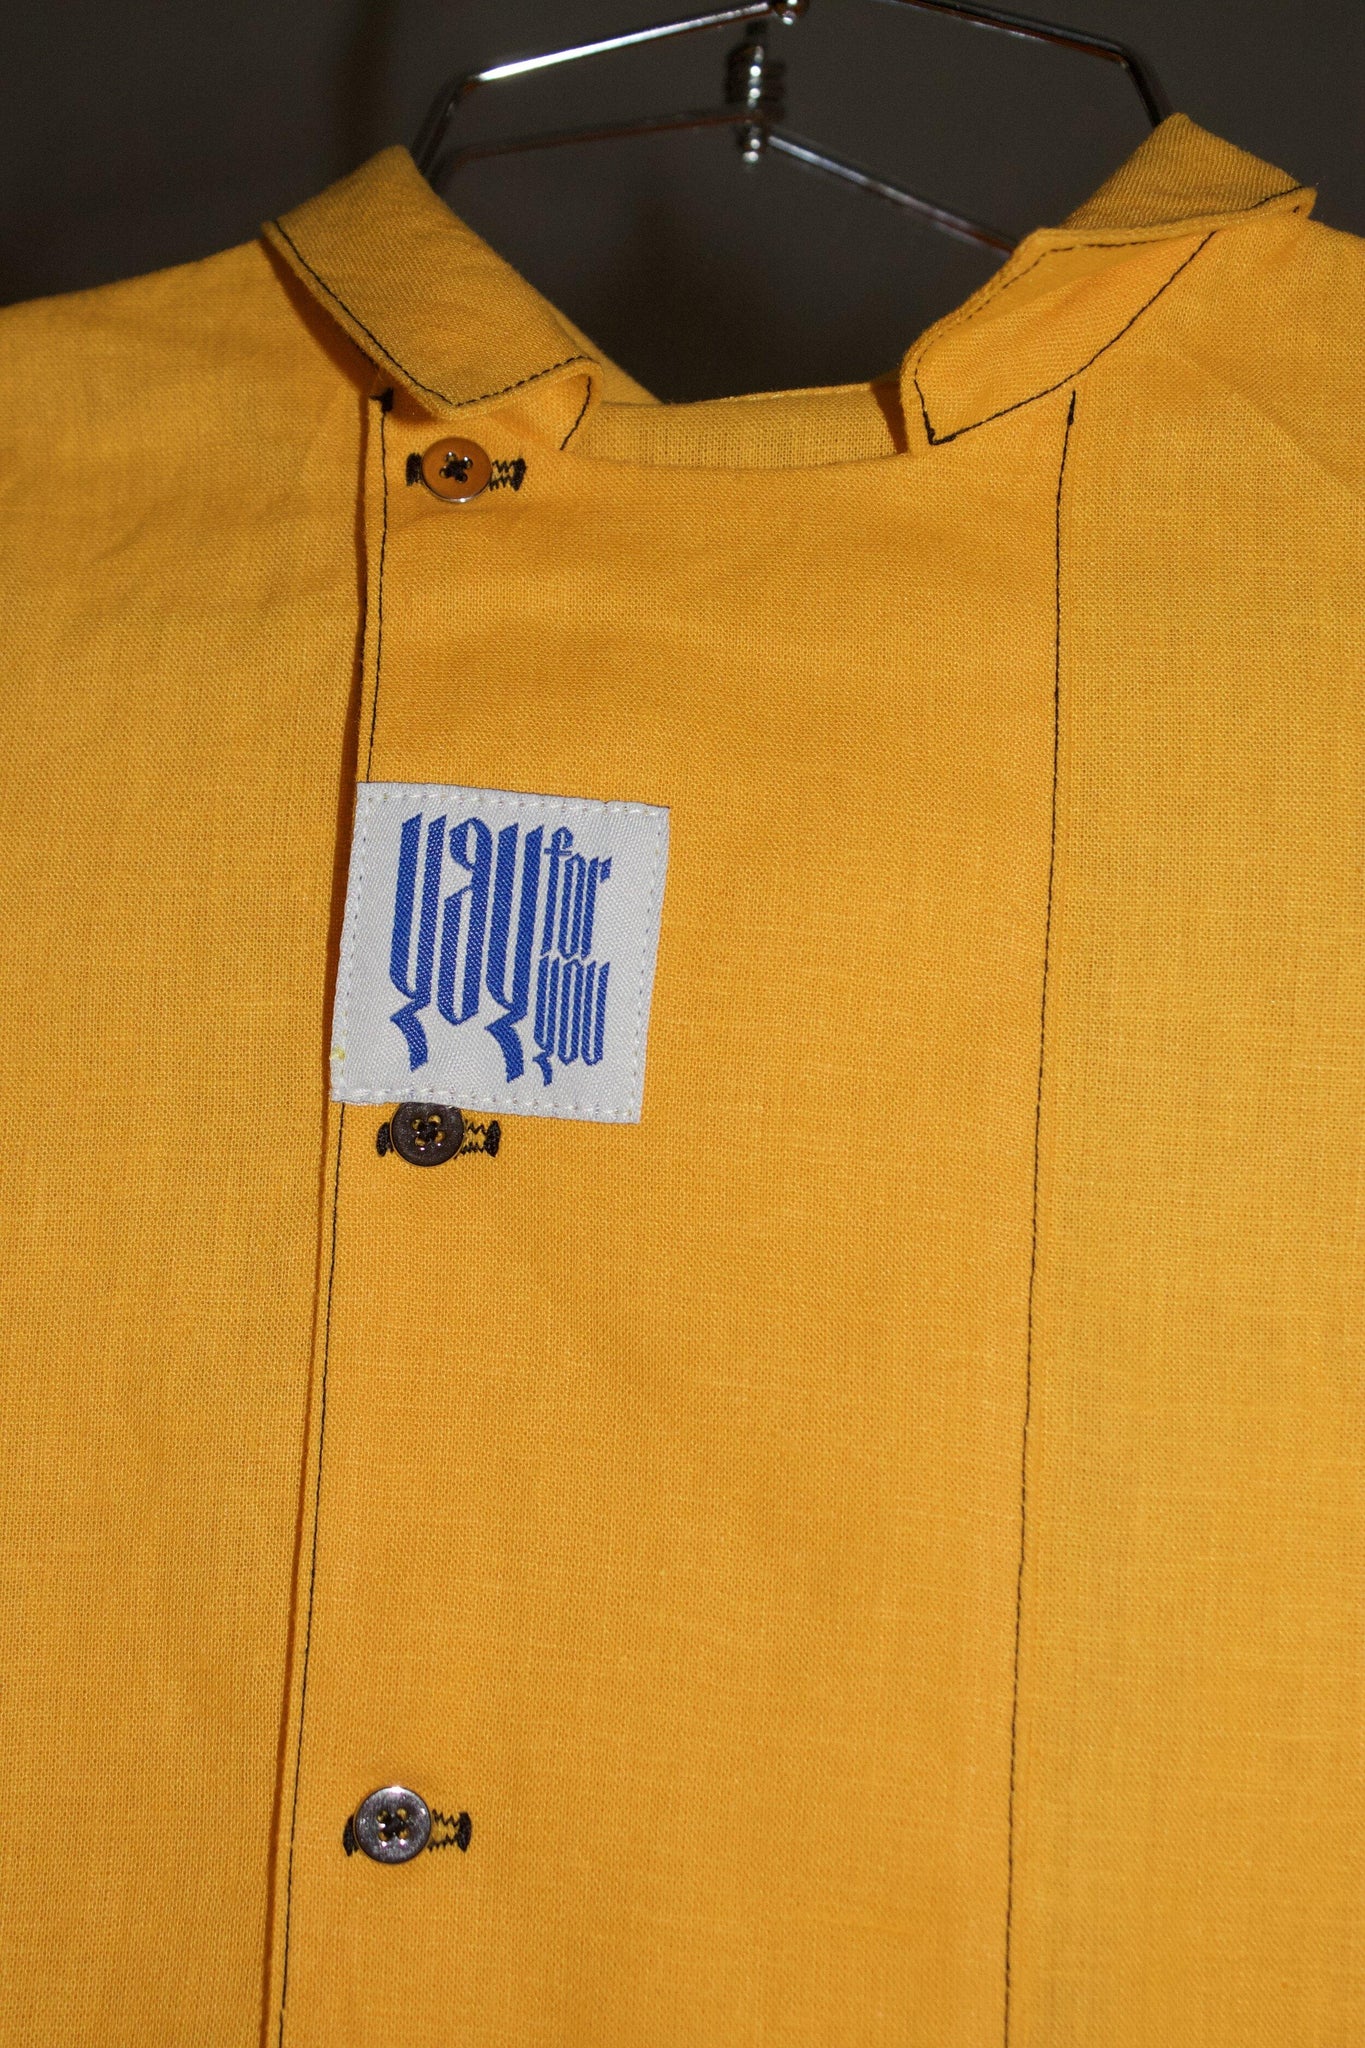 THE ERNIE SOLID YELLOW